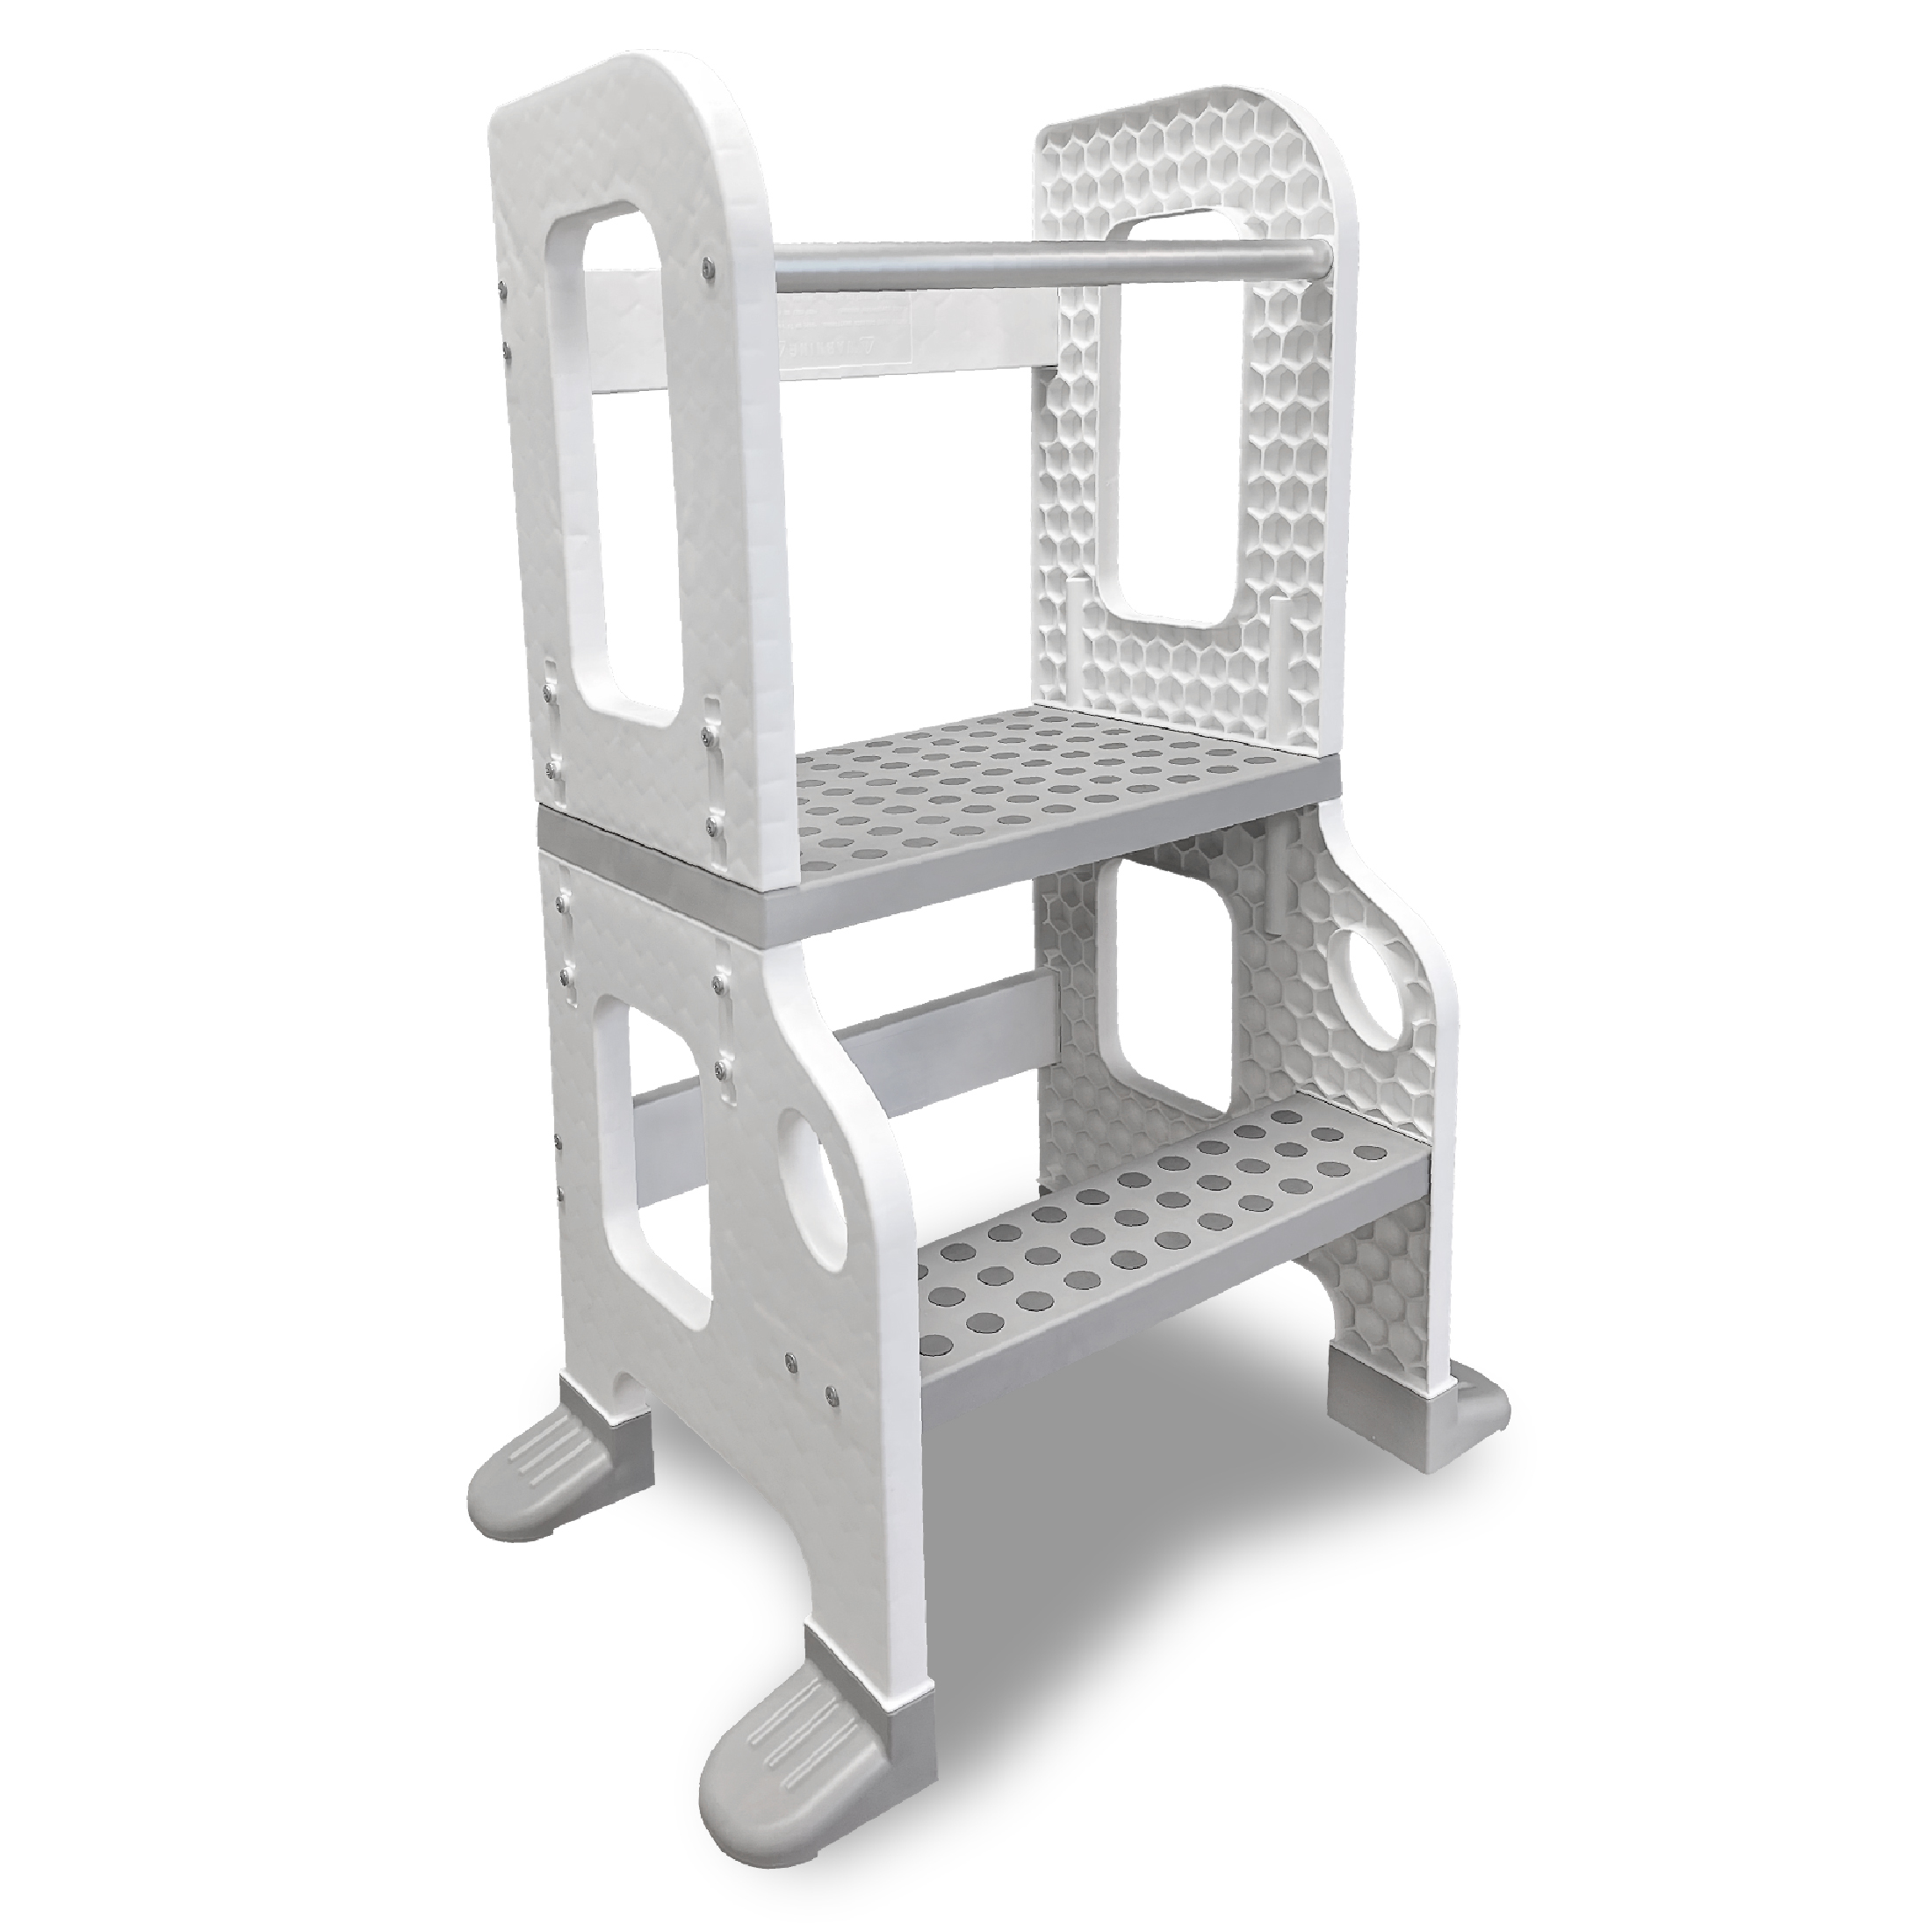 CORE PACIFIC Kitchen Buddy 2-in-1 Stool for Ages 1-3 safe up to 100 lbs. - image 1 of 7